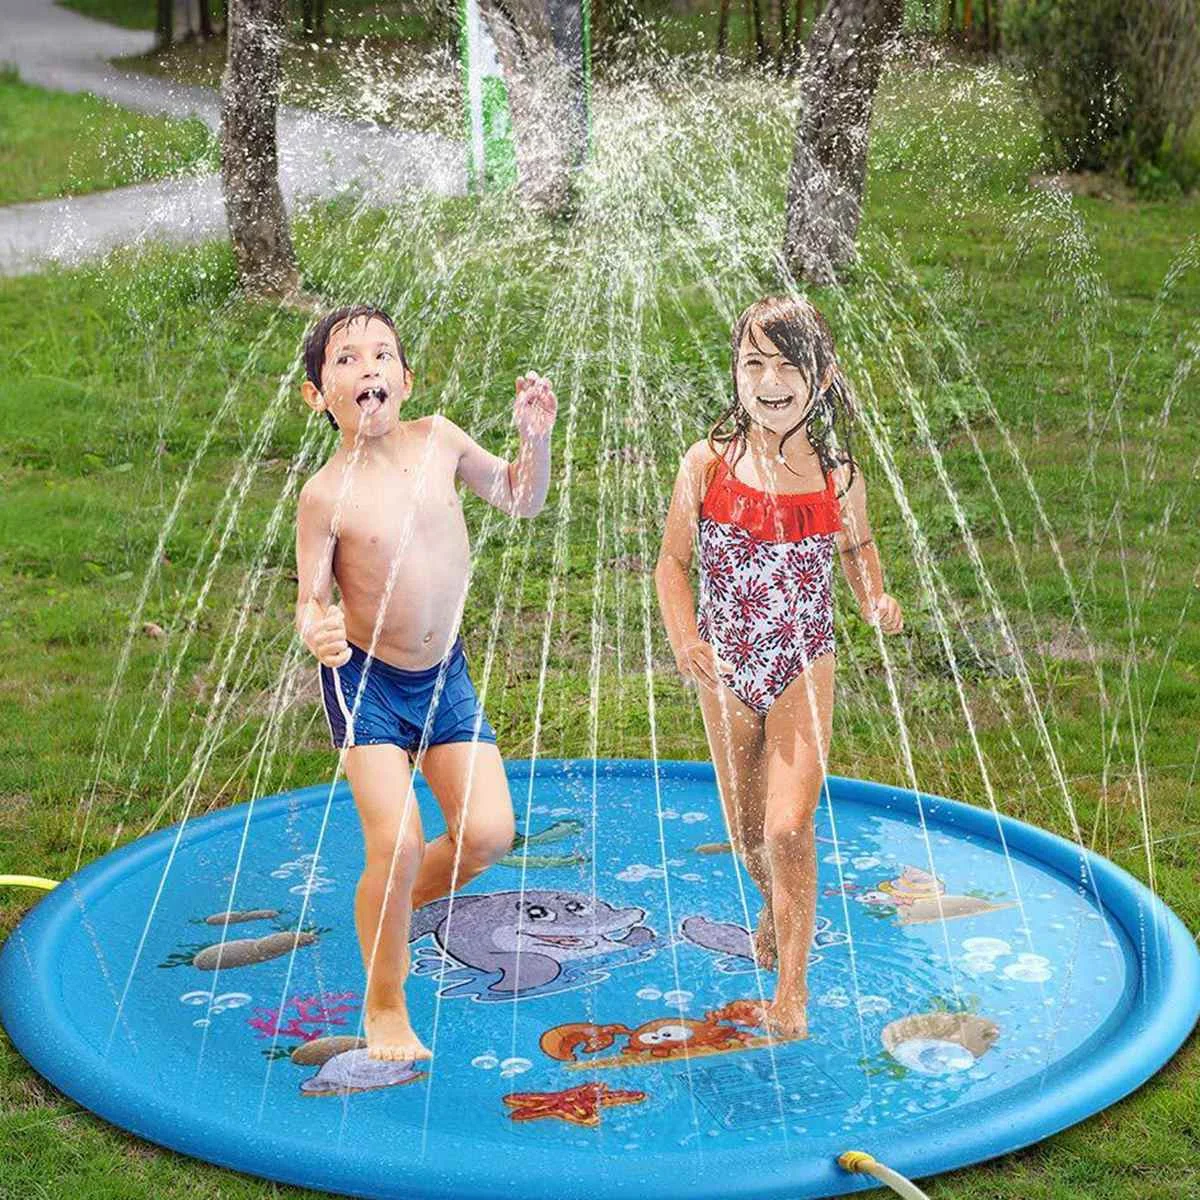 Dren play water mat outdoor game toy lawn for children summer pool kids games fun spray thumb200